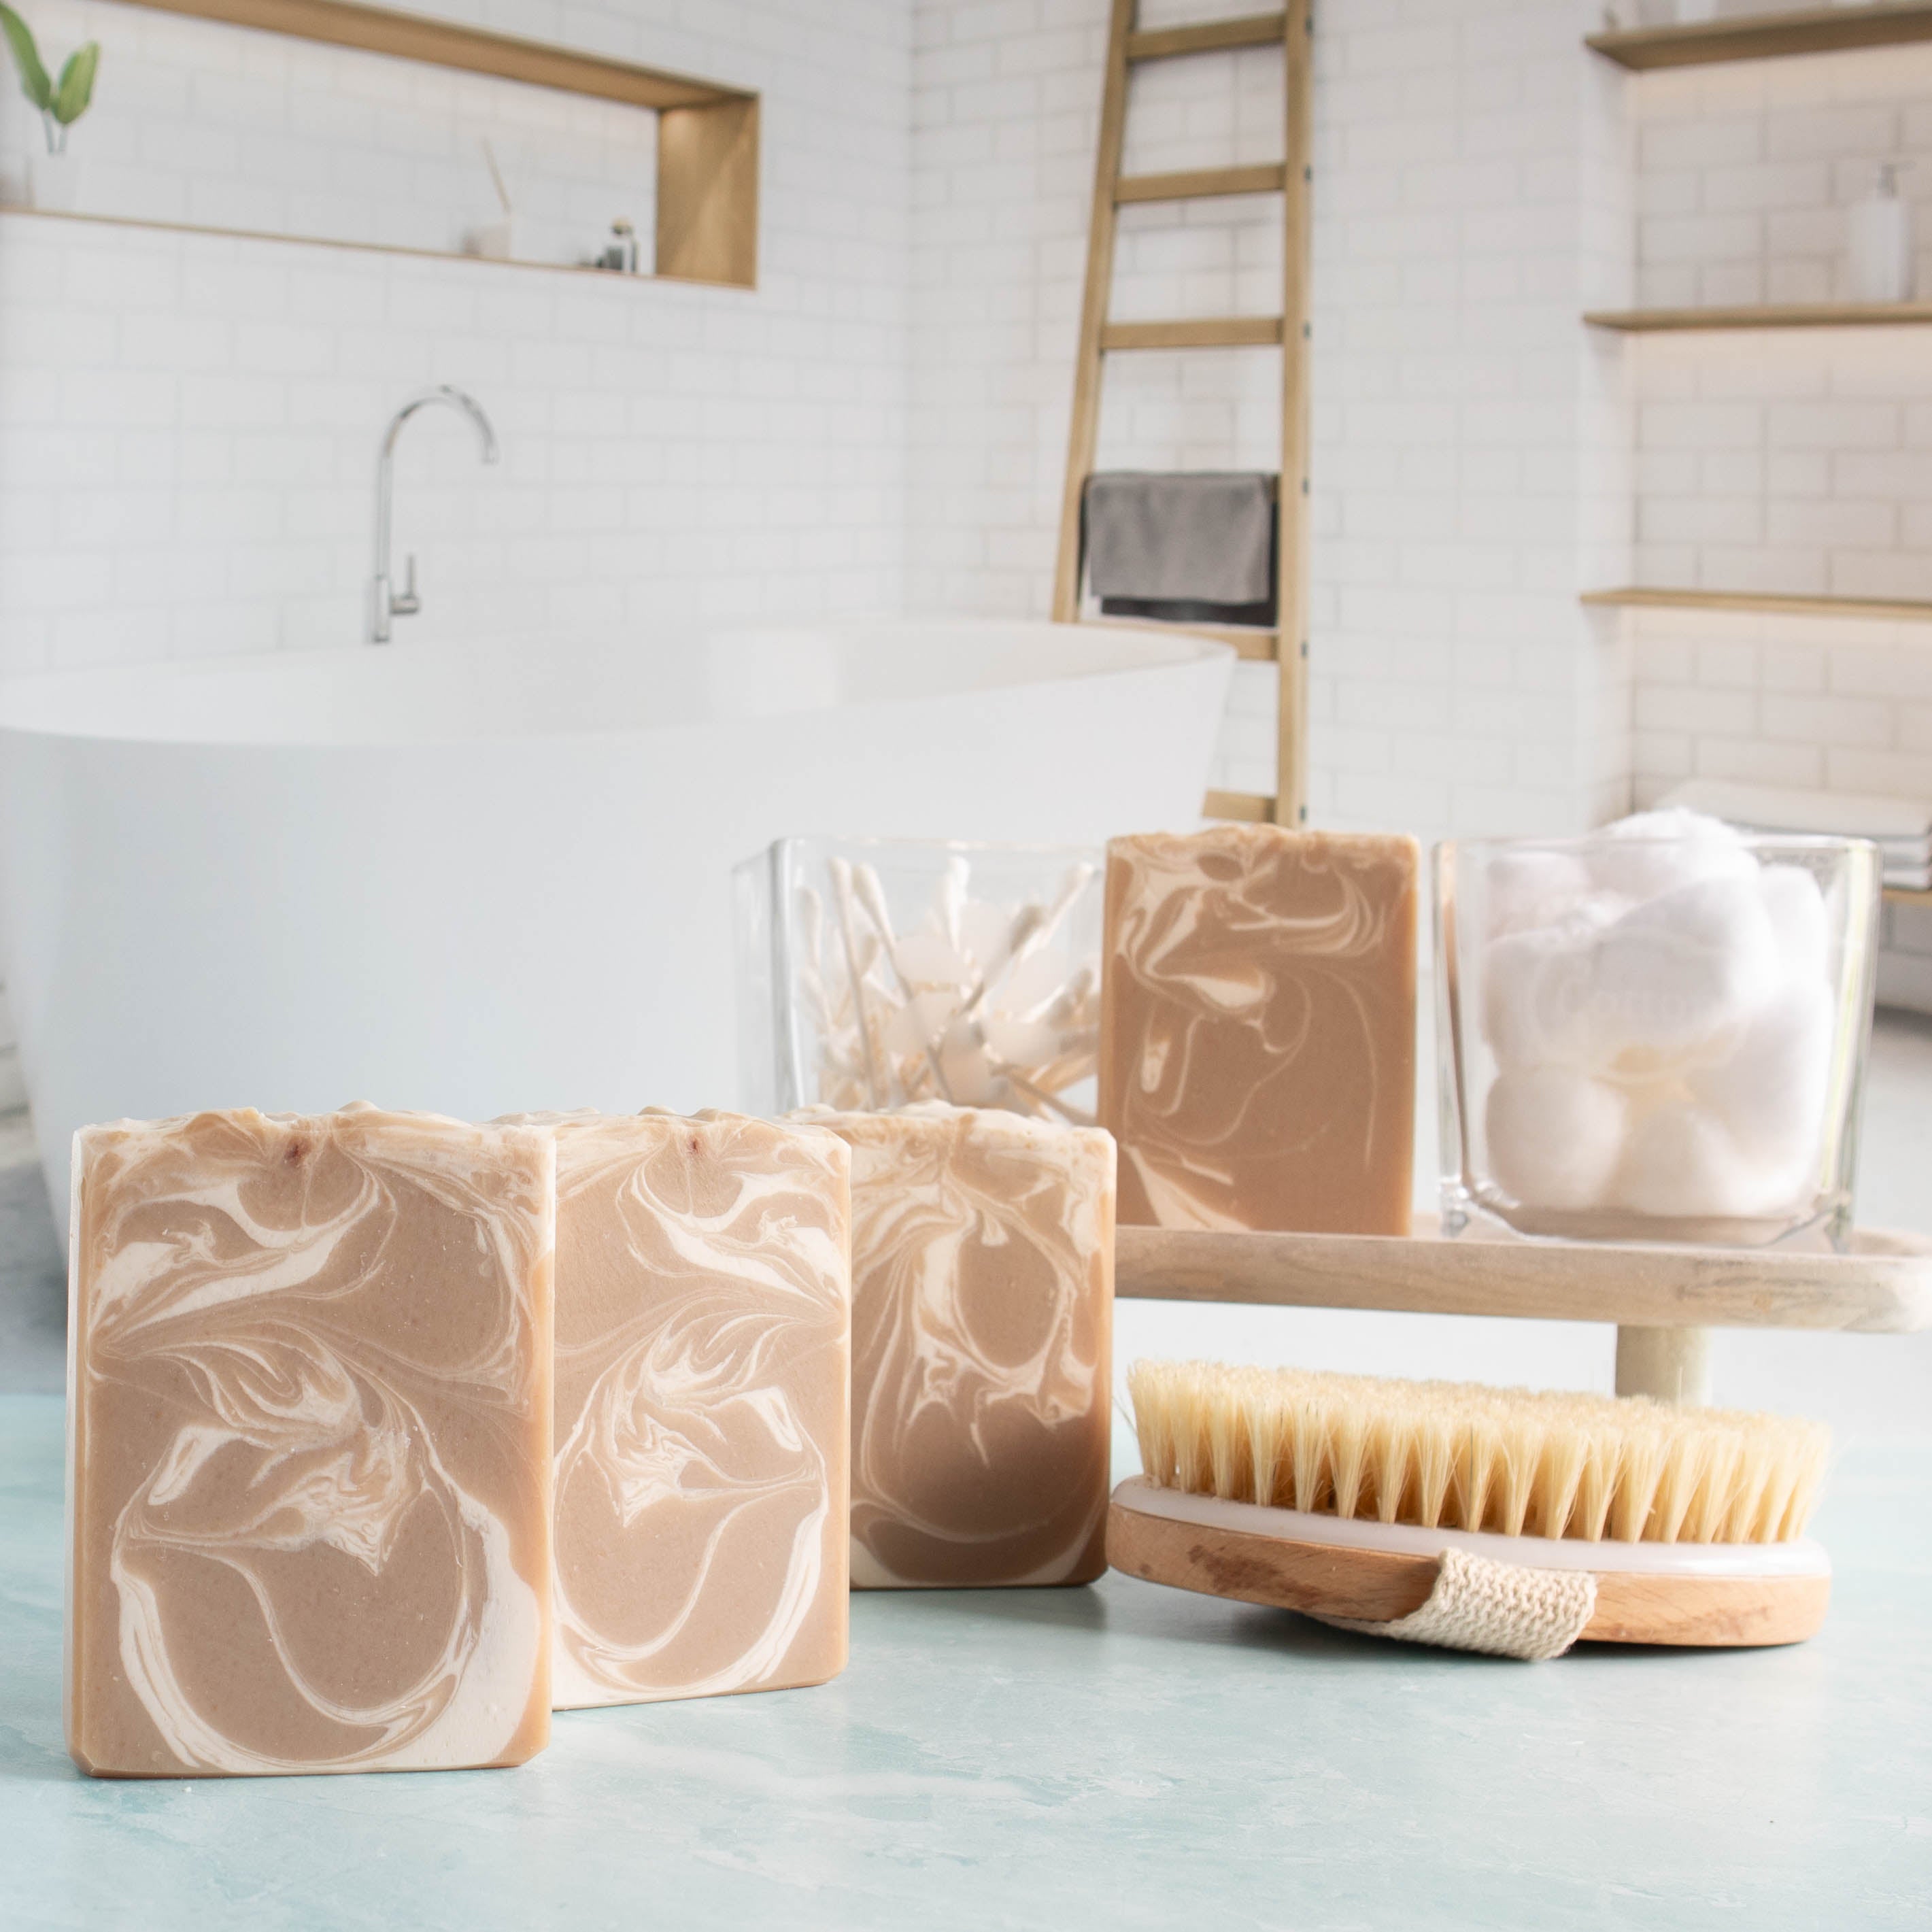 Caribbean teakwood soaps are lined up in a diagonal. they have a very pretty tan color with a wispy white swirl throughout. there is another bar on a tray in the background next to glass containers of q tips and cotton balls. lastly there is a body brush in front of the tray for interest.